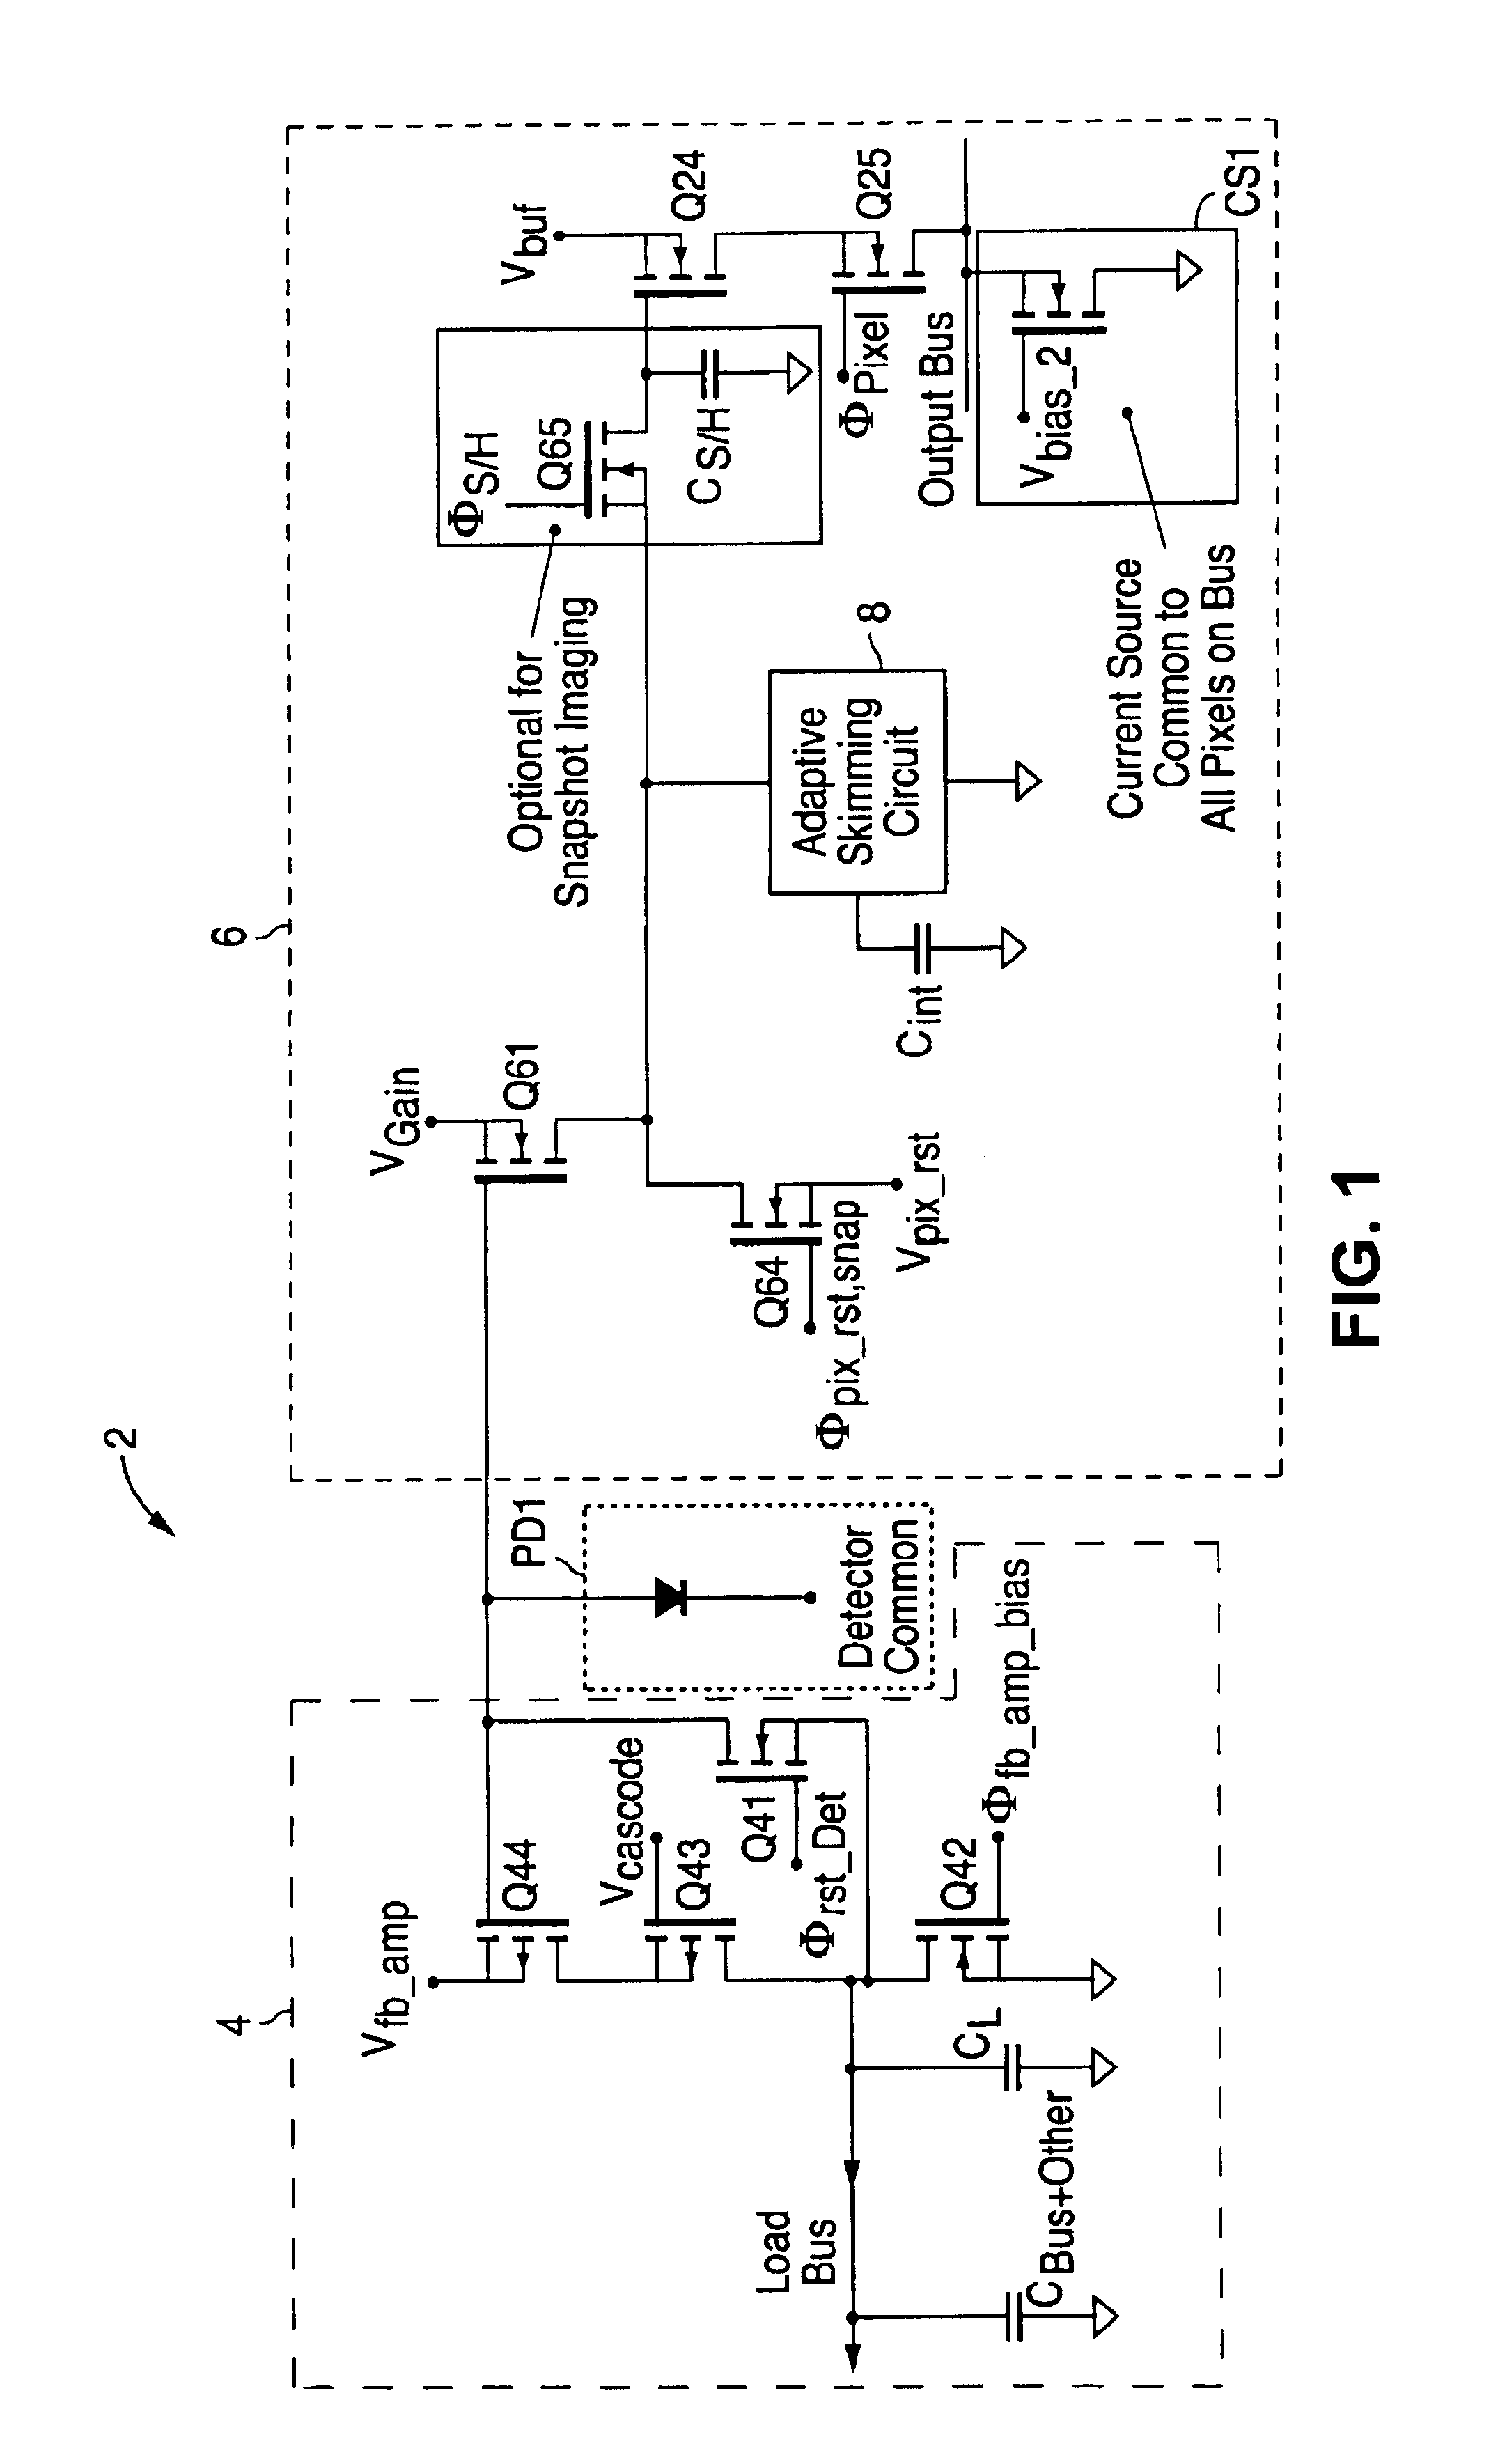 High gain detector amplifier with enhanced dynamic range for single photon read-out of photodetectors